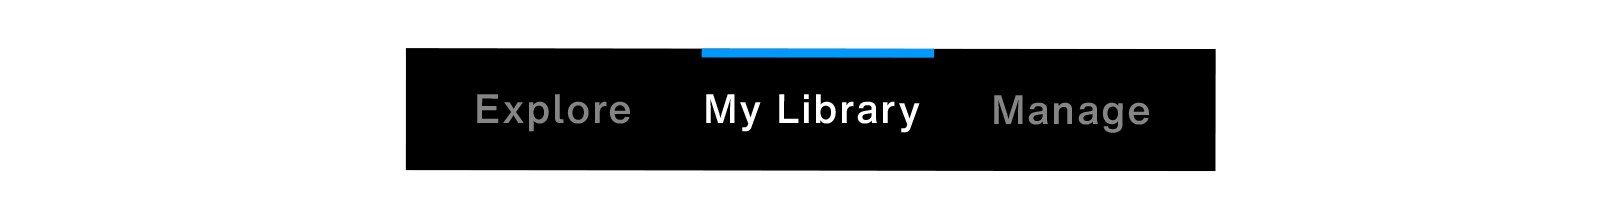 My library_01